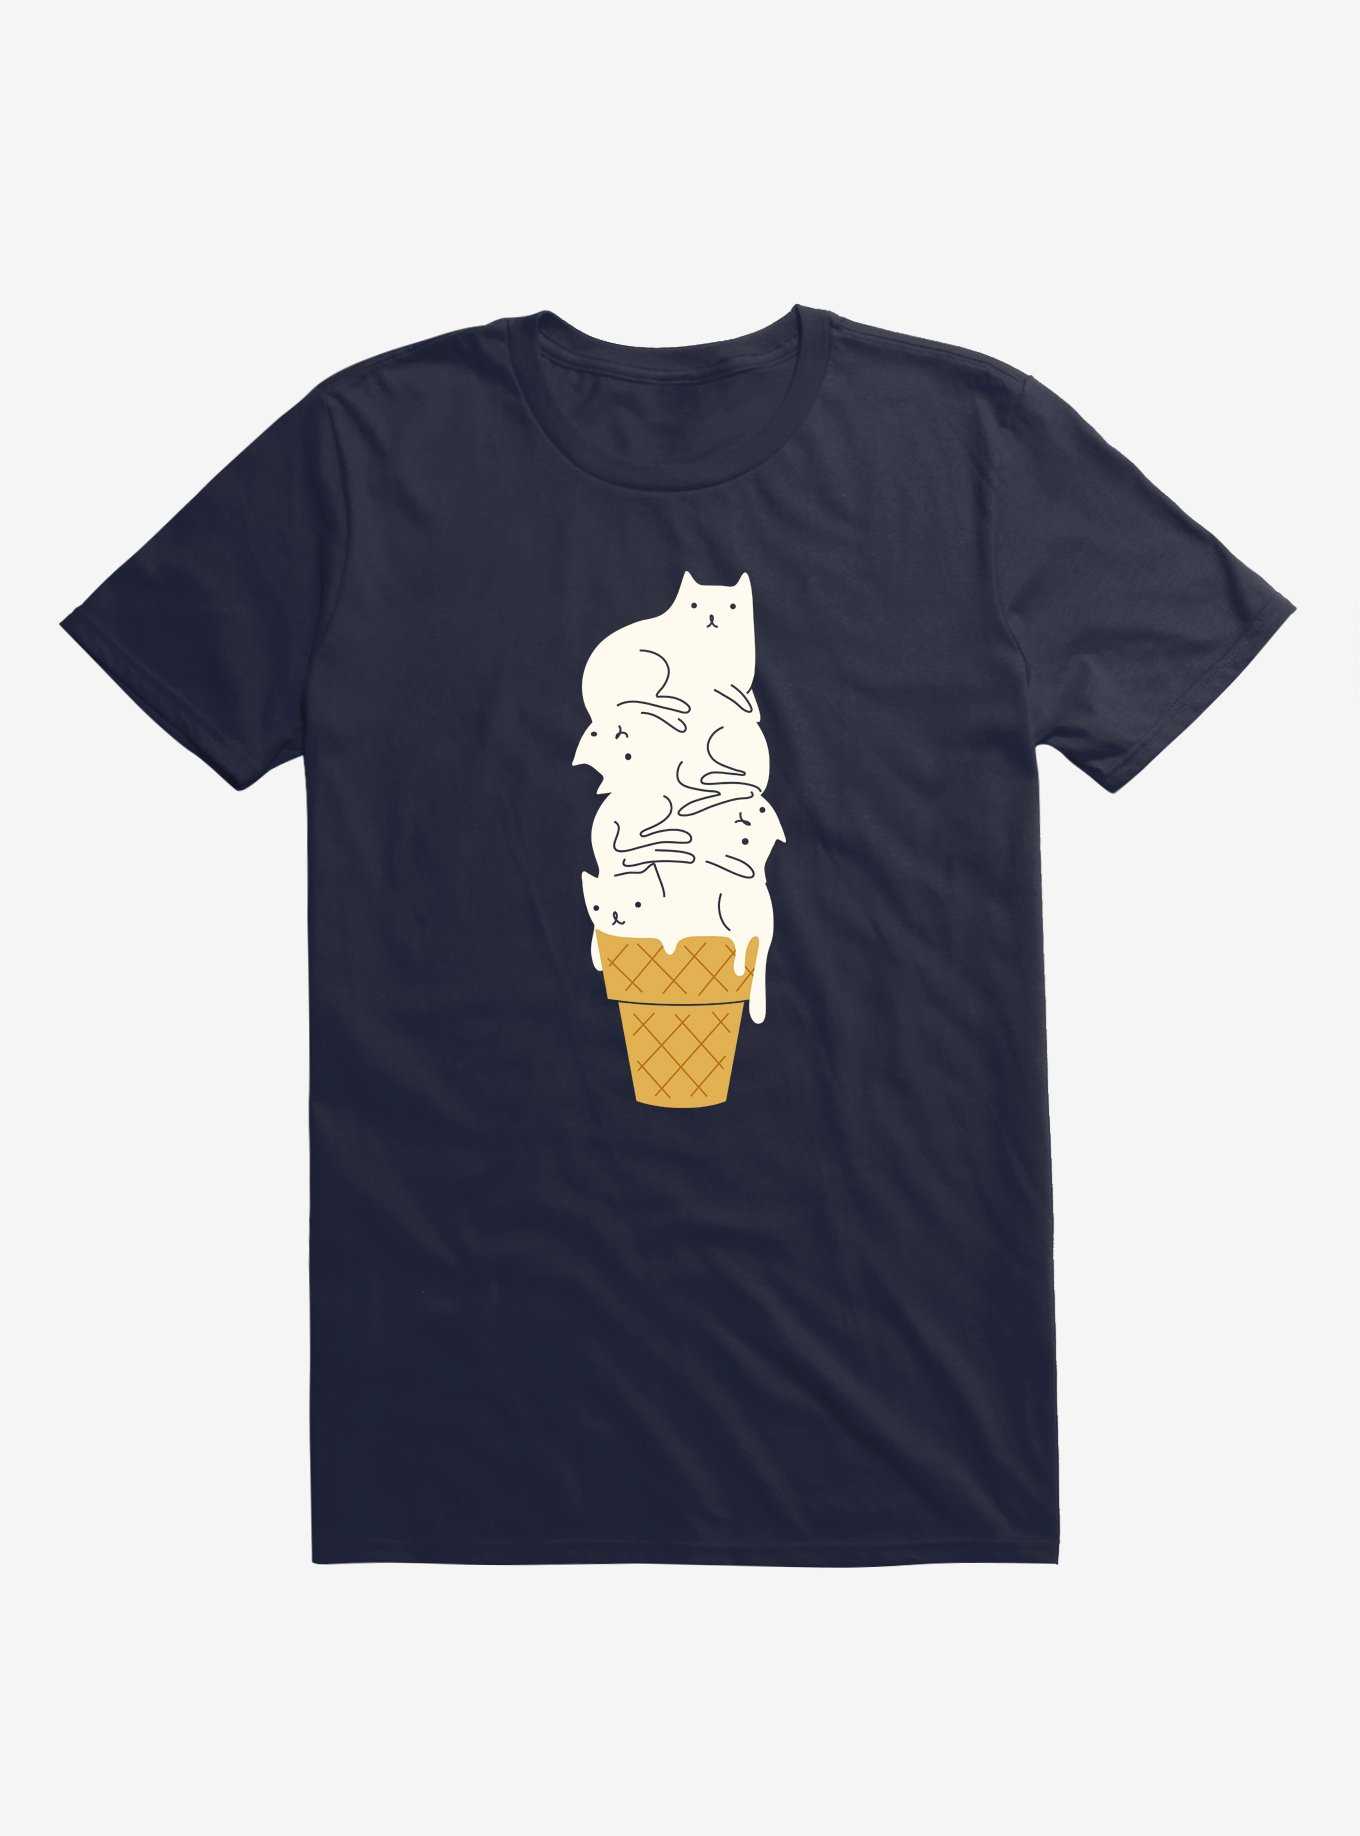 Meowlting Ice Cream Cats Navy Blue T-Shirt, , hi-res